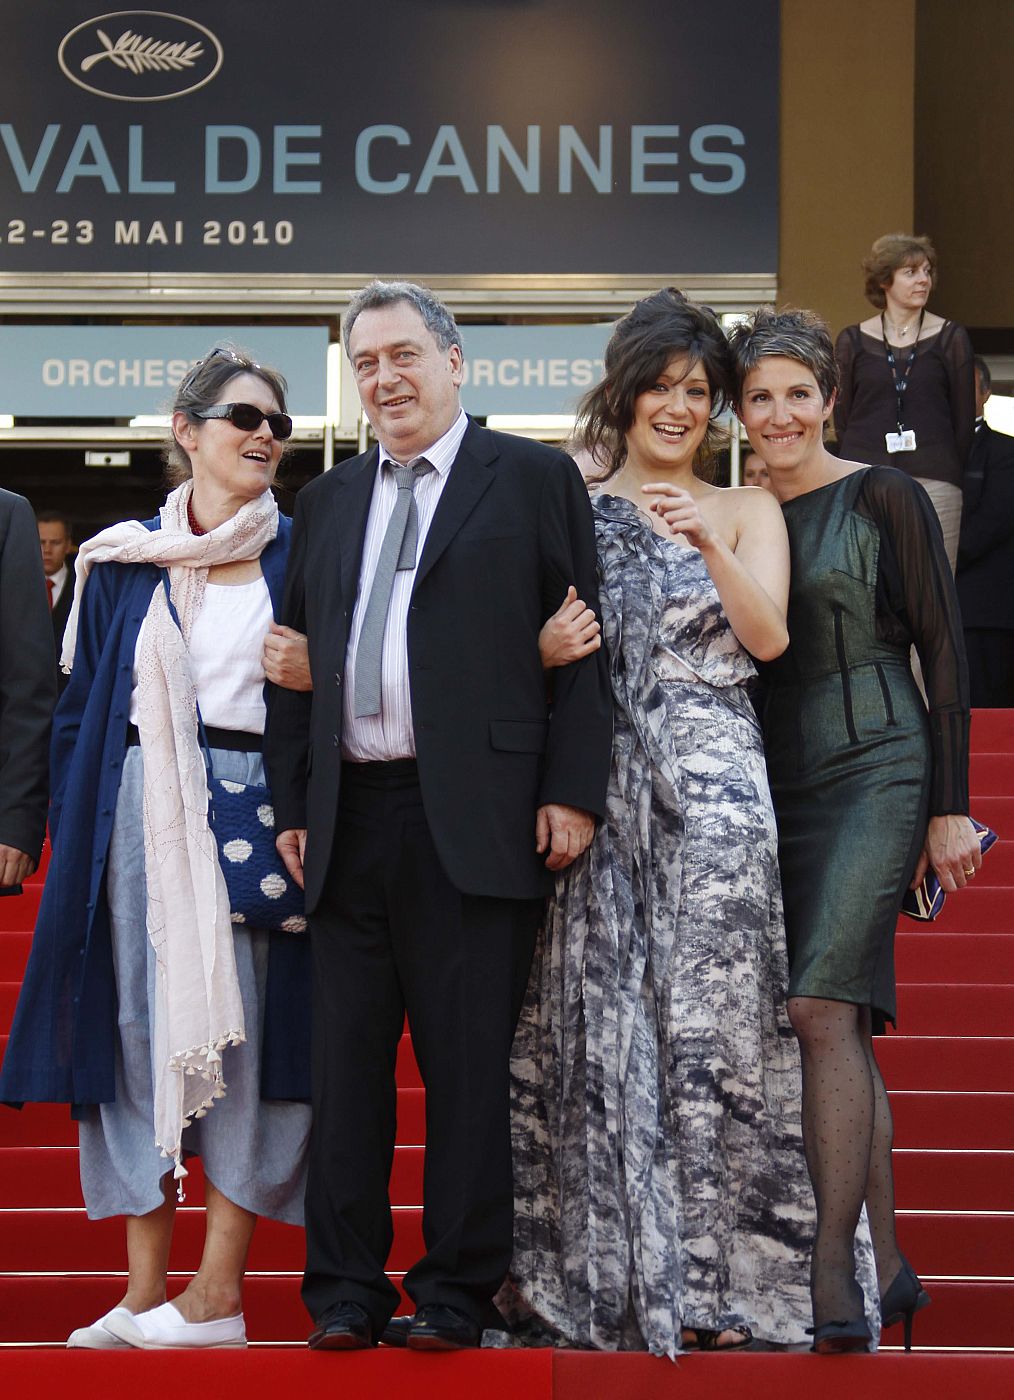 Director Stephen Frears poses with an unidentified women and cast member Tamsin Greig on the red carpet as they arrive at the 63rd Cannes Film Festival